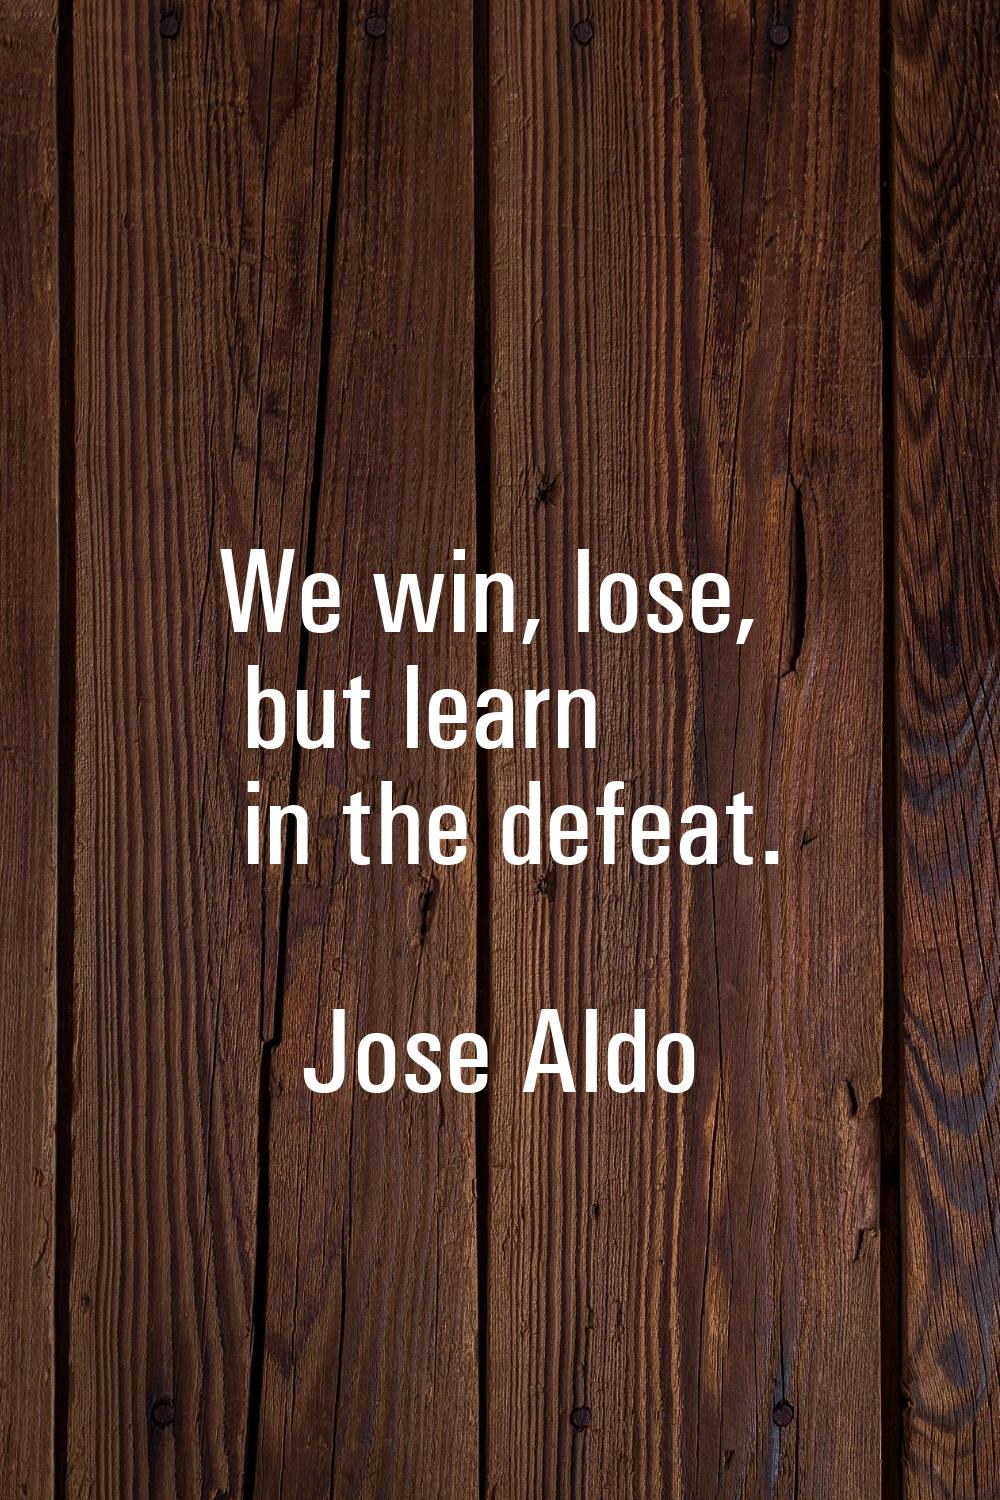 We win, lose, but learn in the defeat.